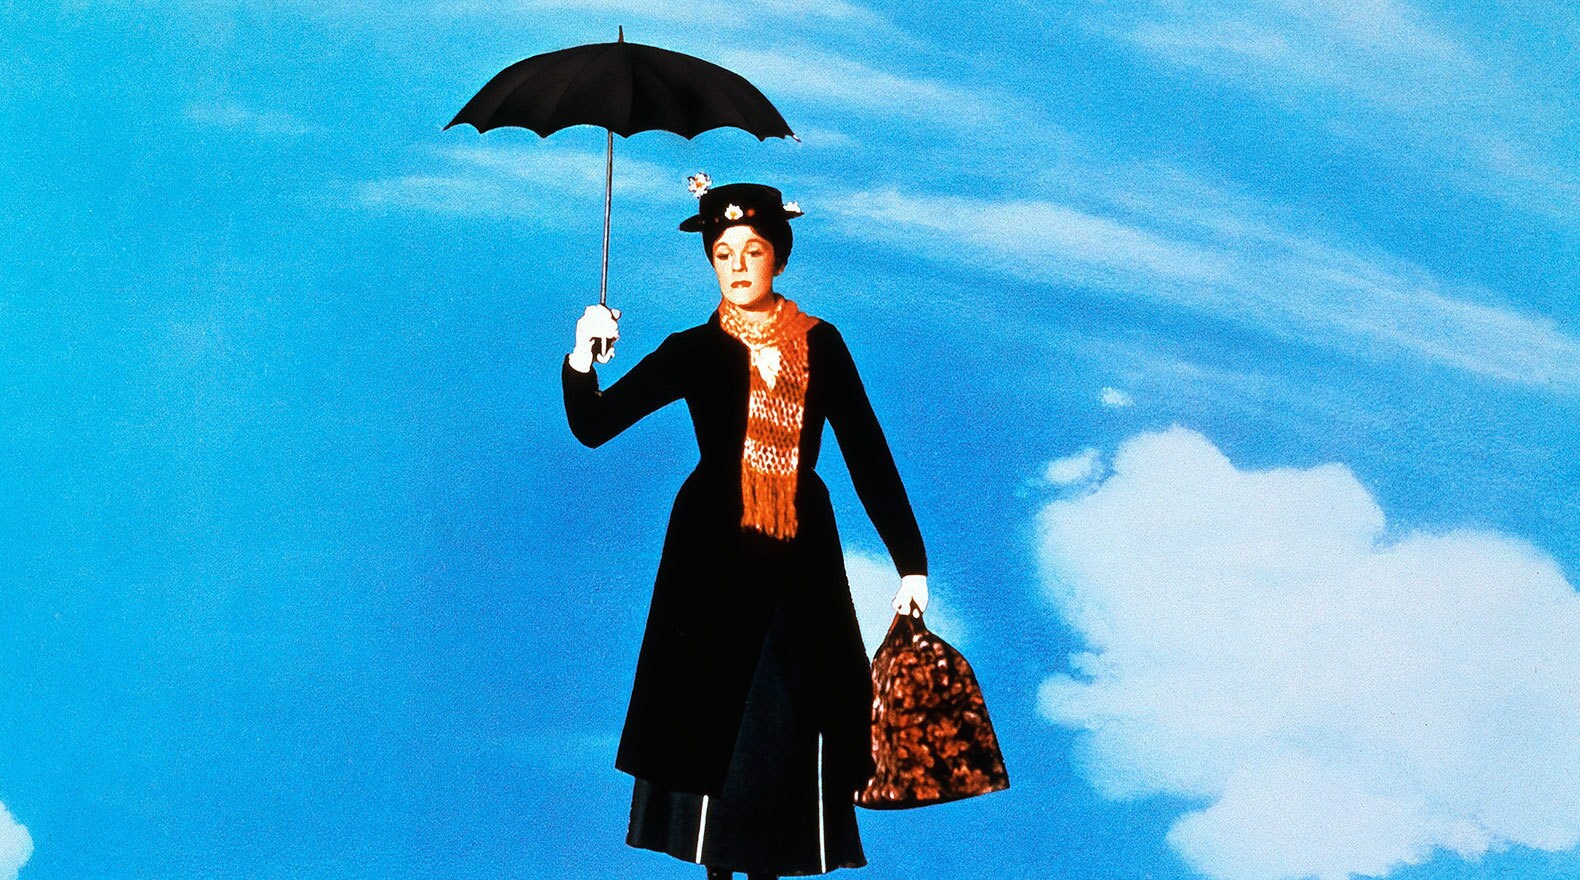 Mary Poppins flies off on her umbrella, to help another family in "Mary Poppins"